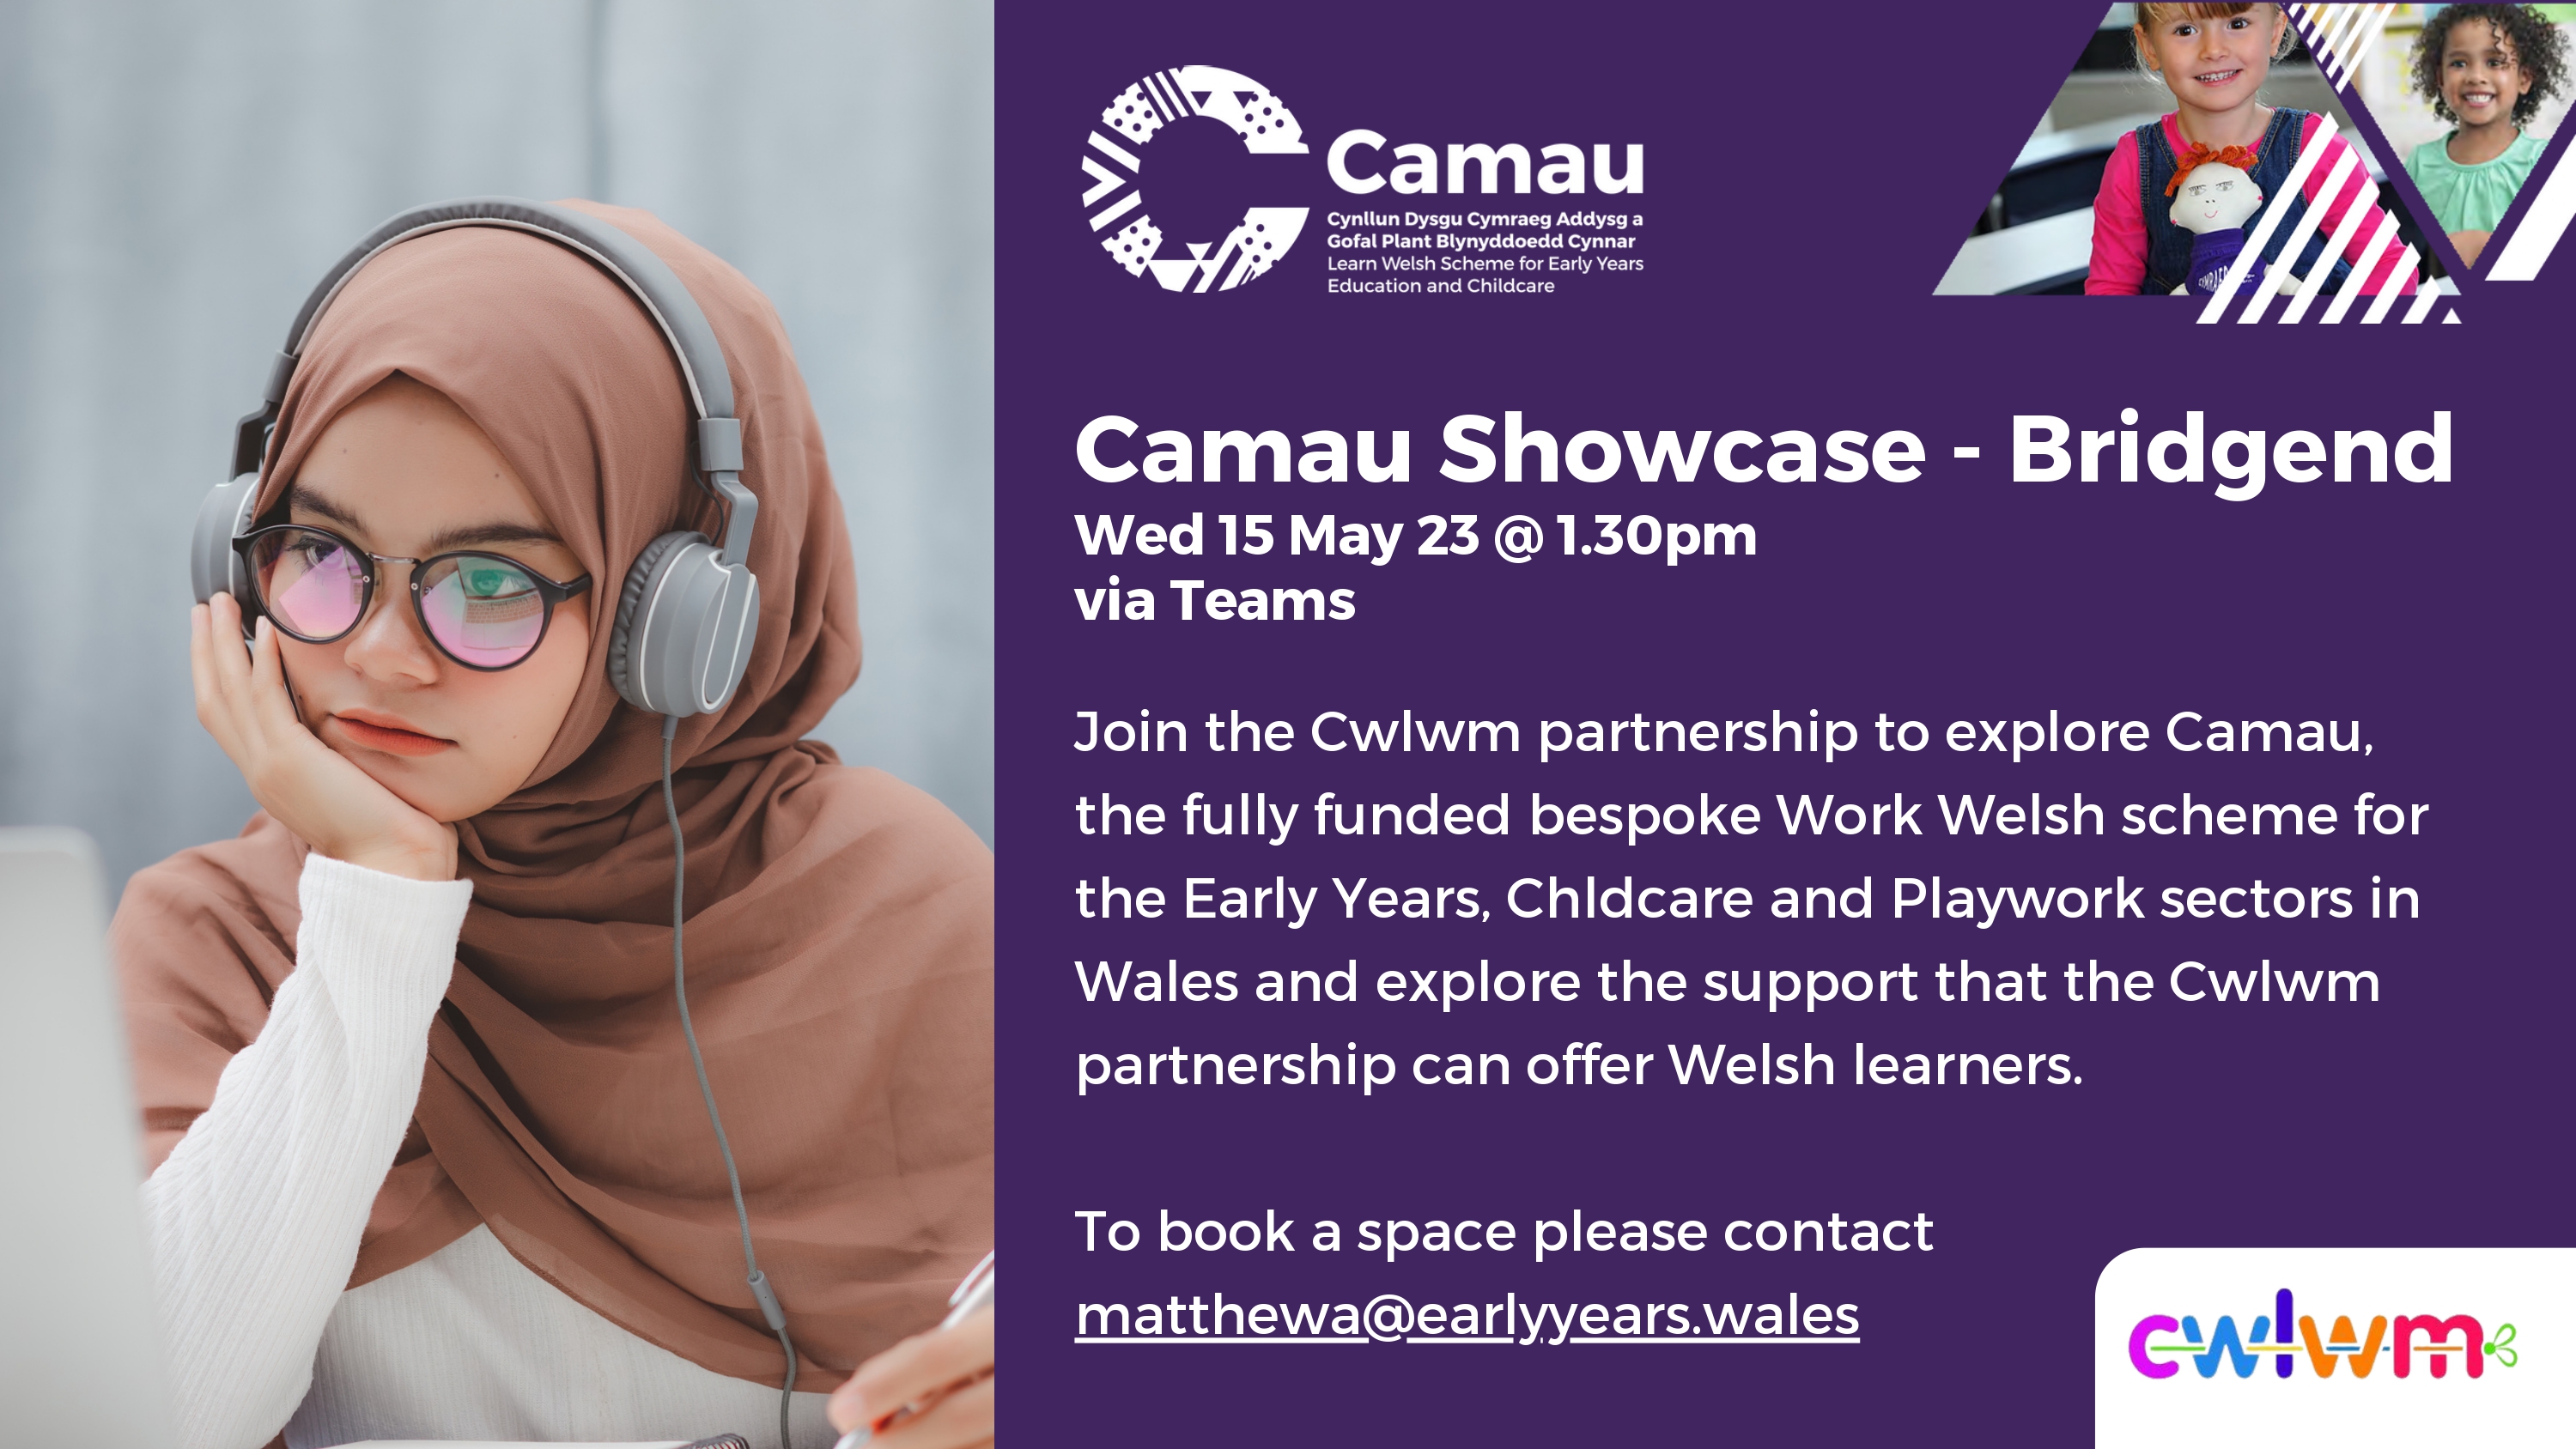 Join the Cwlwm partnership to explore Camau, the fully funded bespoke Work Welsh scheme for the Early Years, Chldcare and Playwork sectors in Wales and explore the support that the Cwlwm partnership can offer Welsh learners.